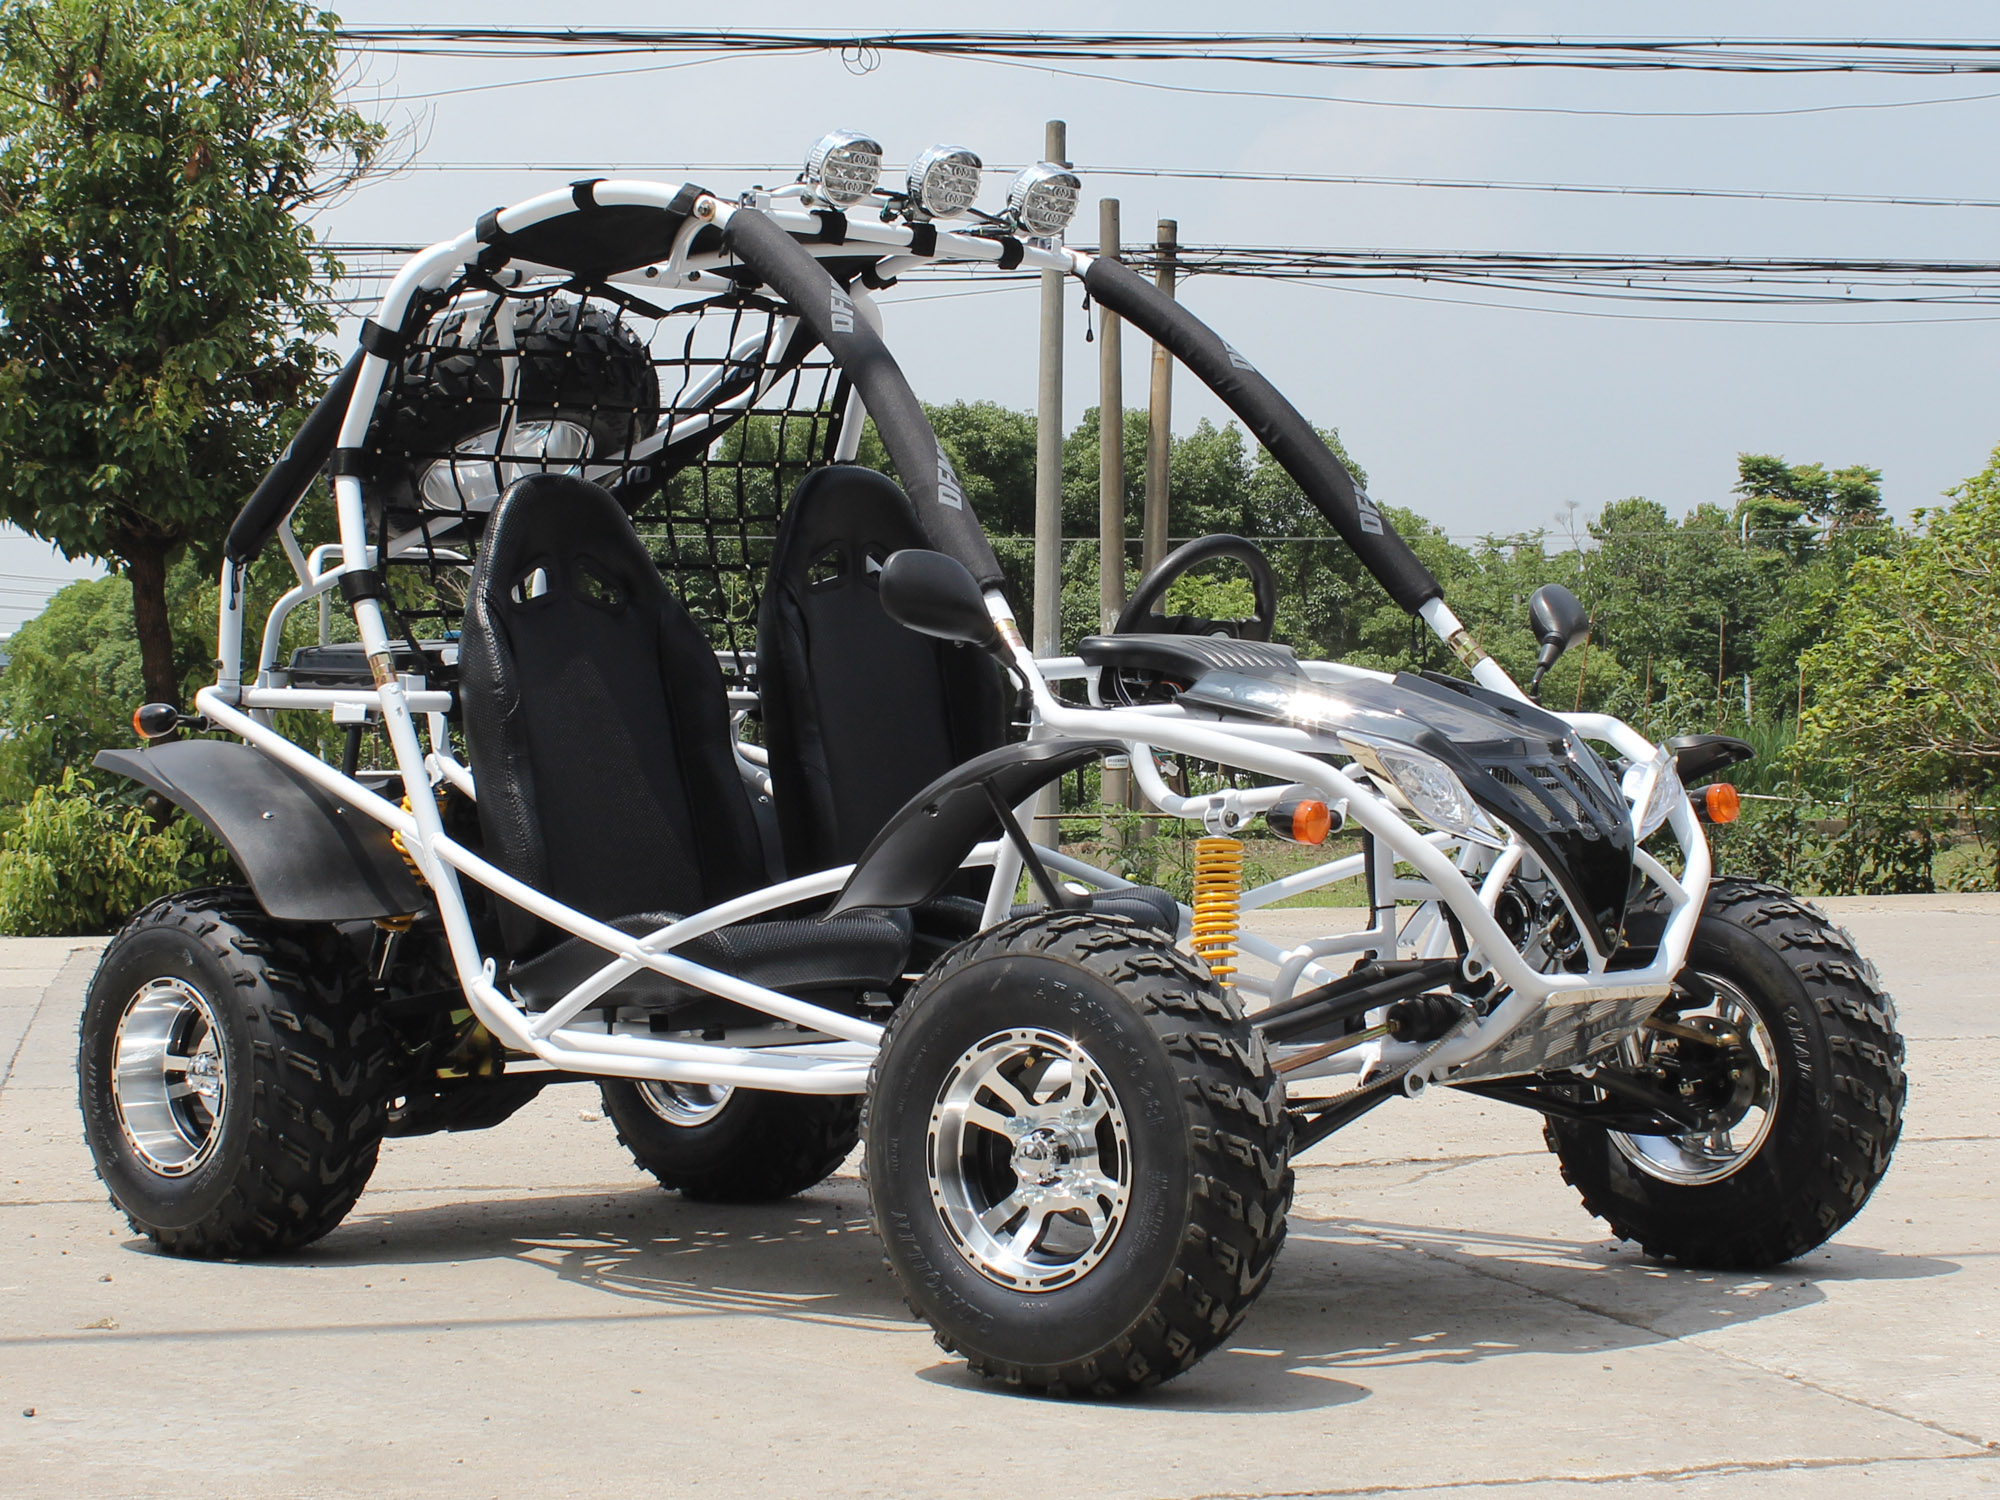 offroad racing buggy x atv x moto review